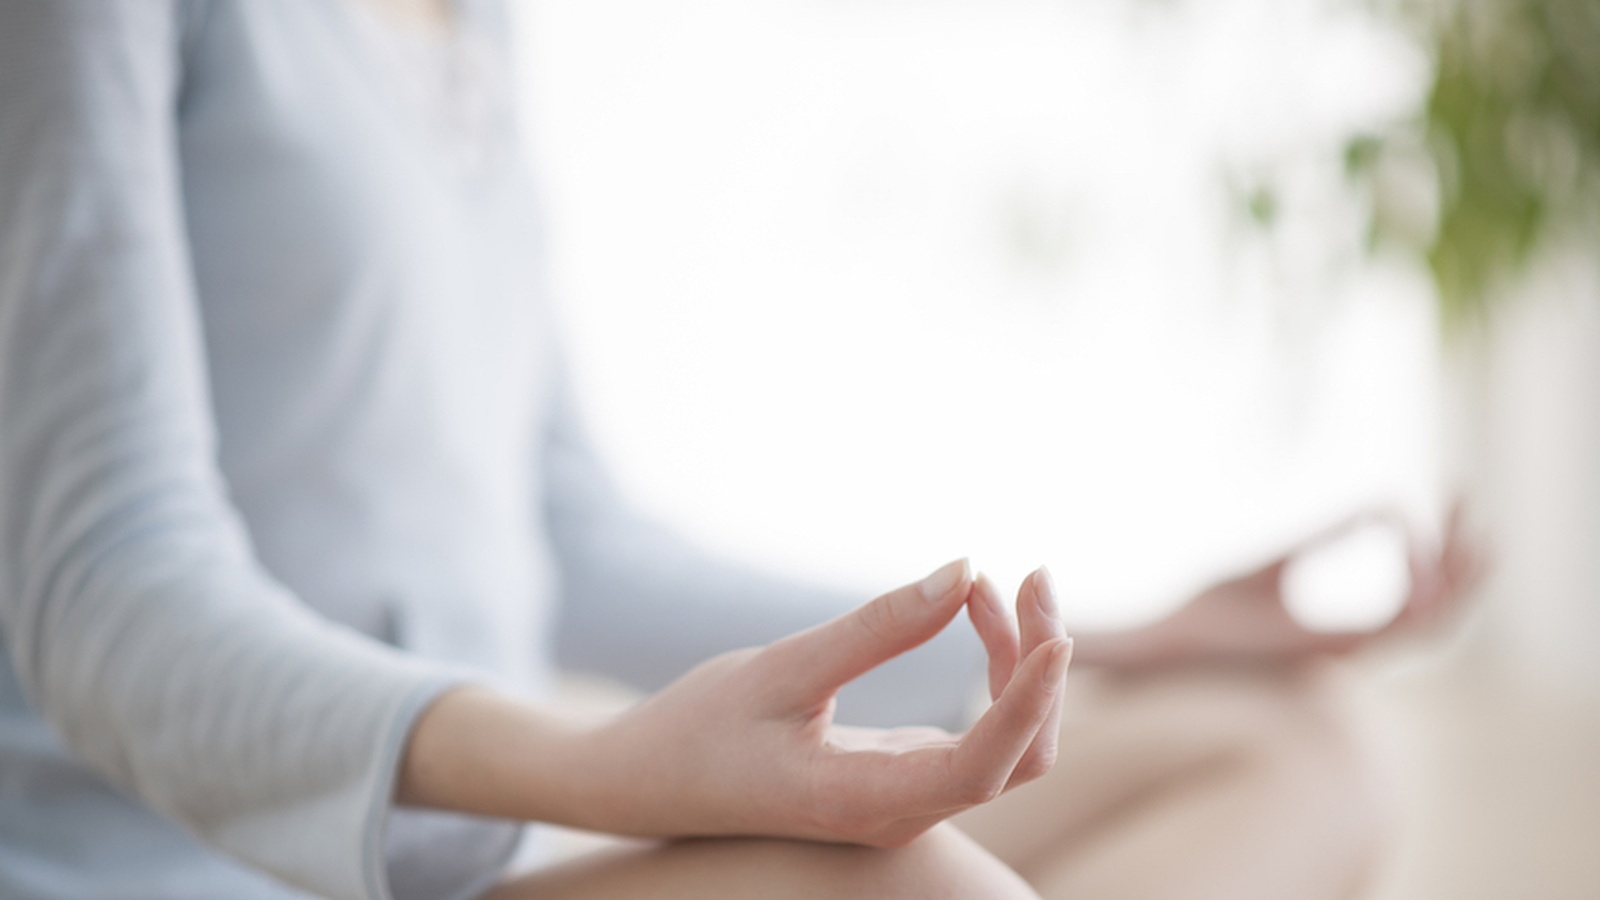 5 Tips if You're New to Meditating